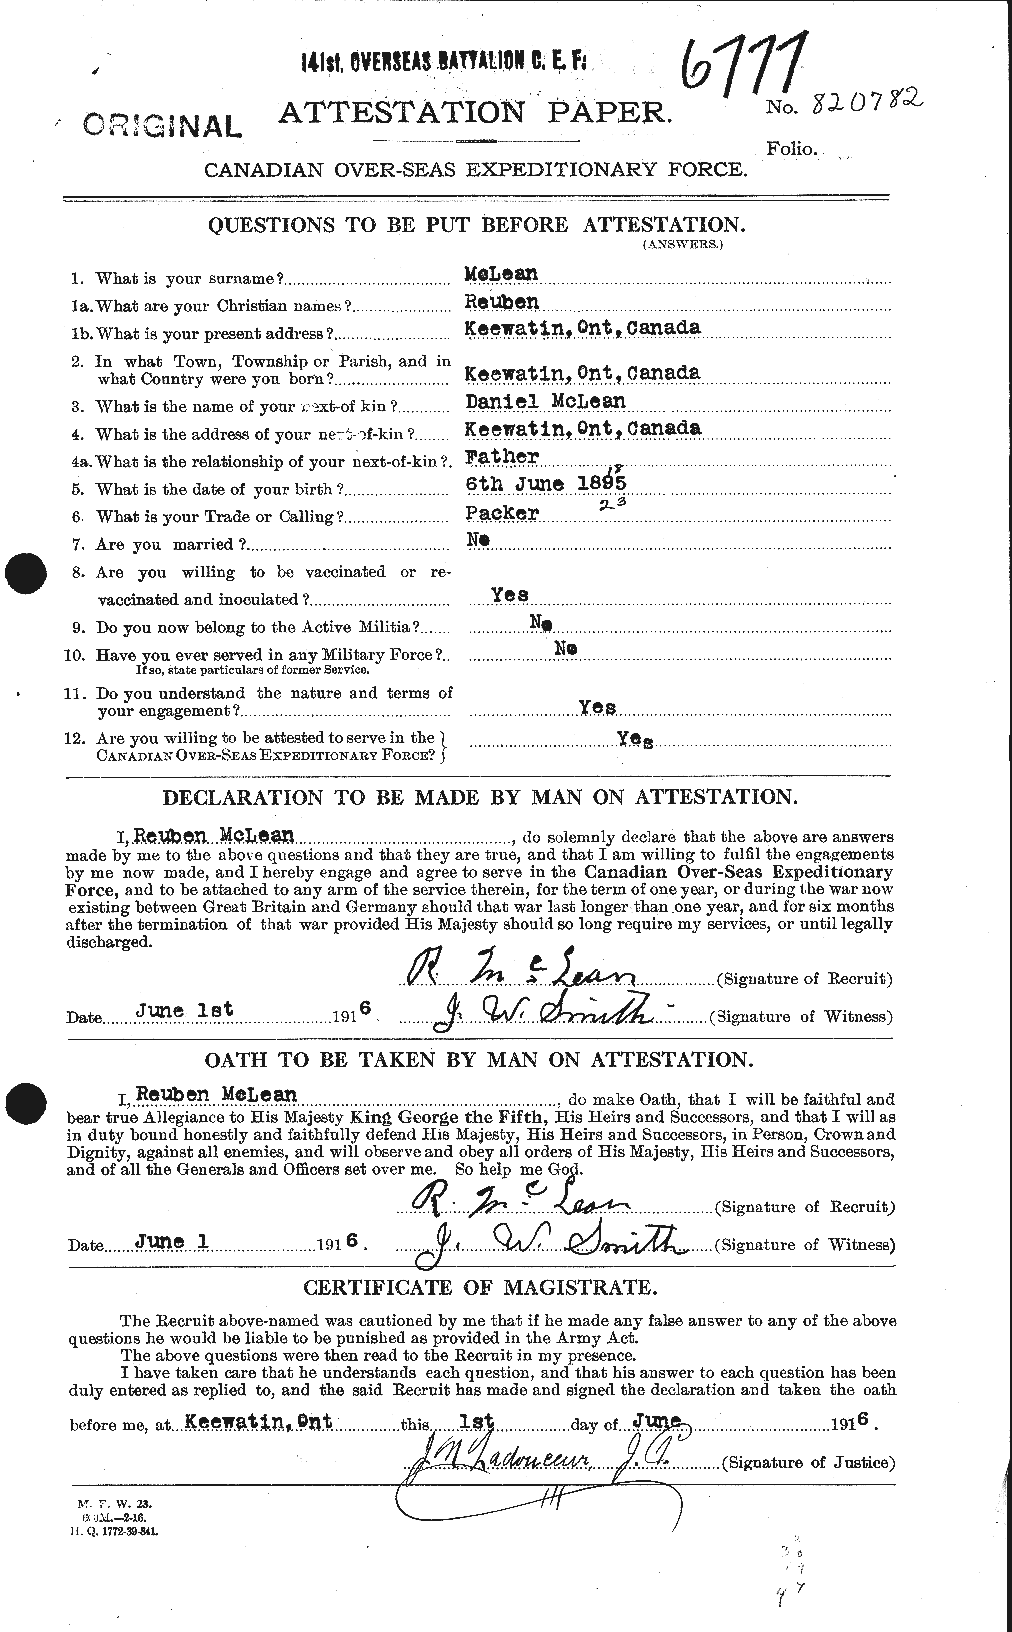 Personnel Records of the First World War - CEF 533439a